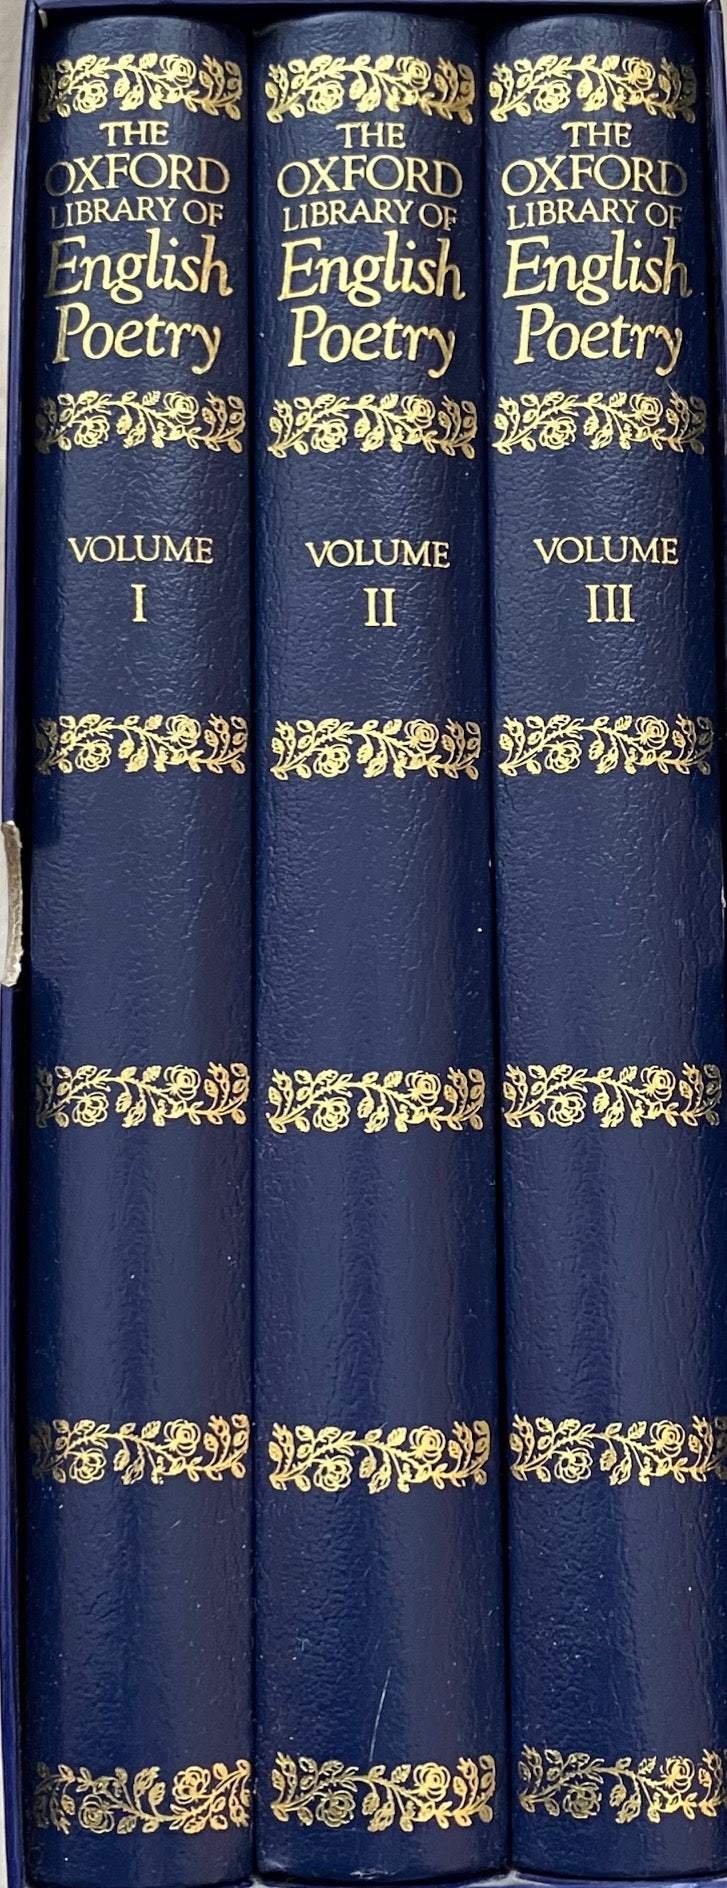 The Oxford Library of English Poetry Vol. 1-3, edited by John Wain